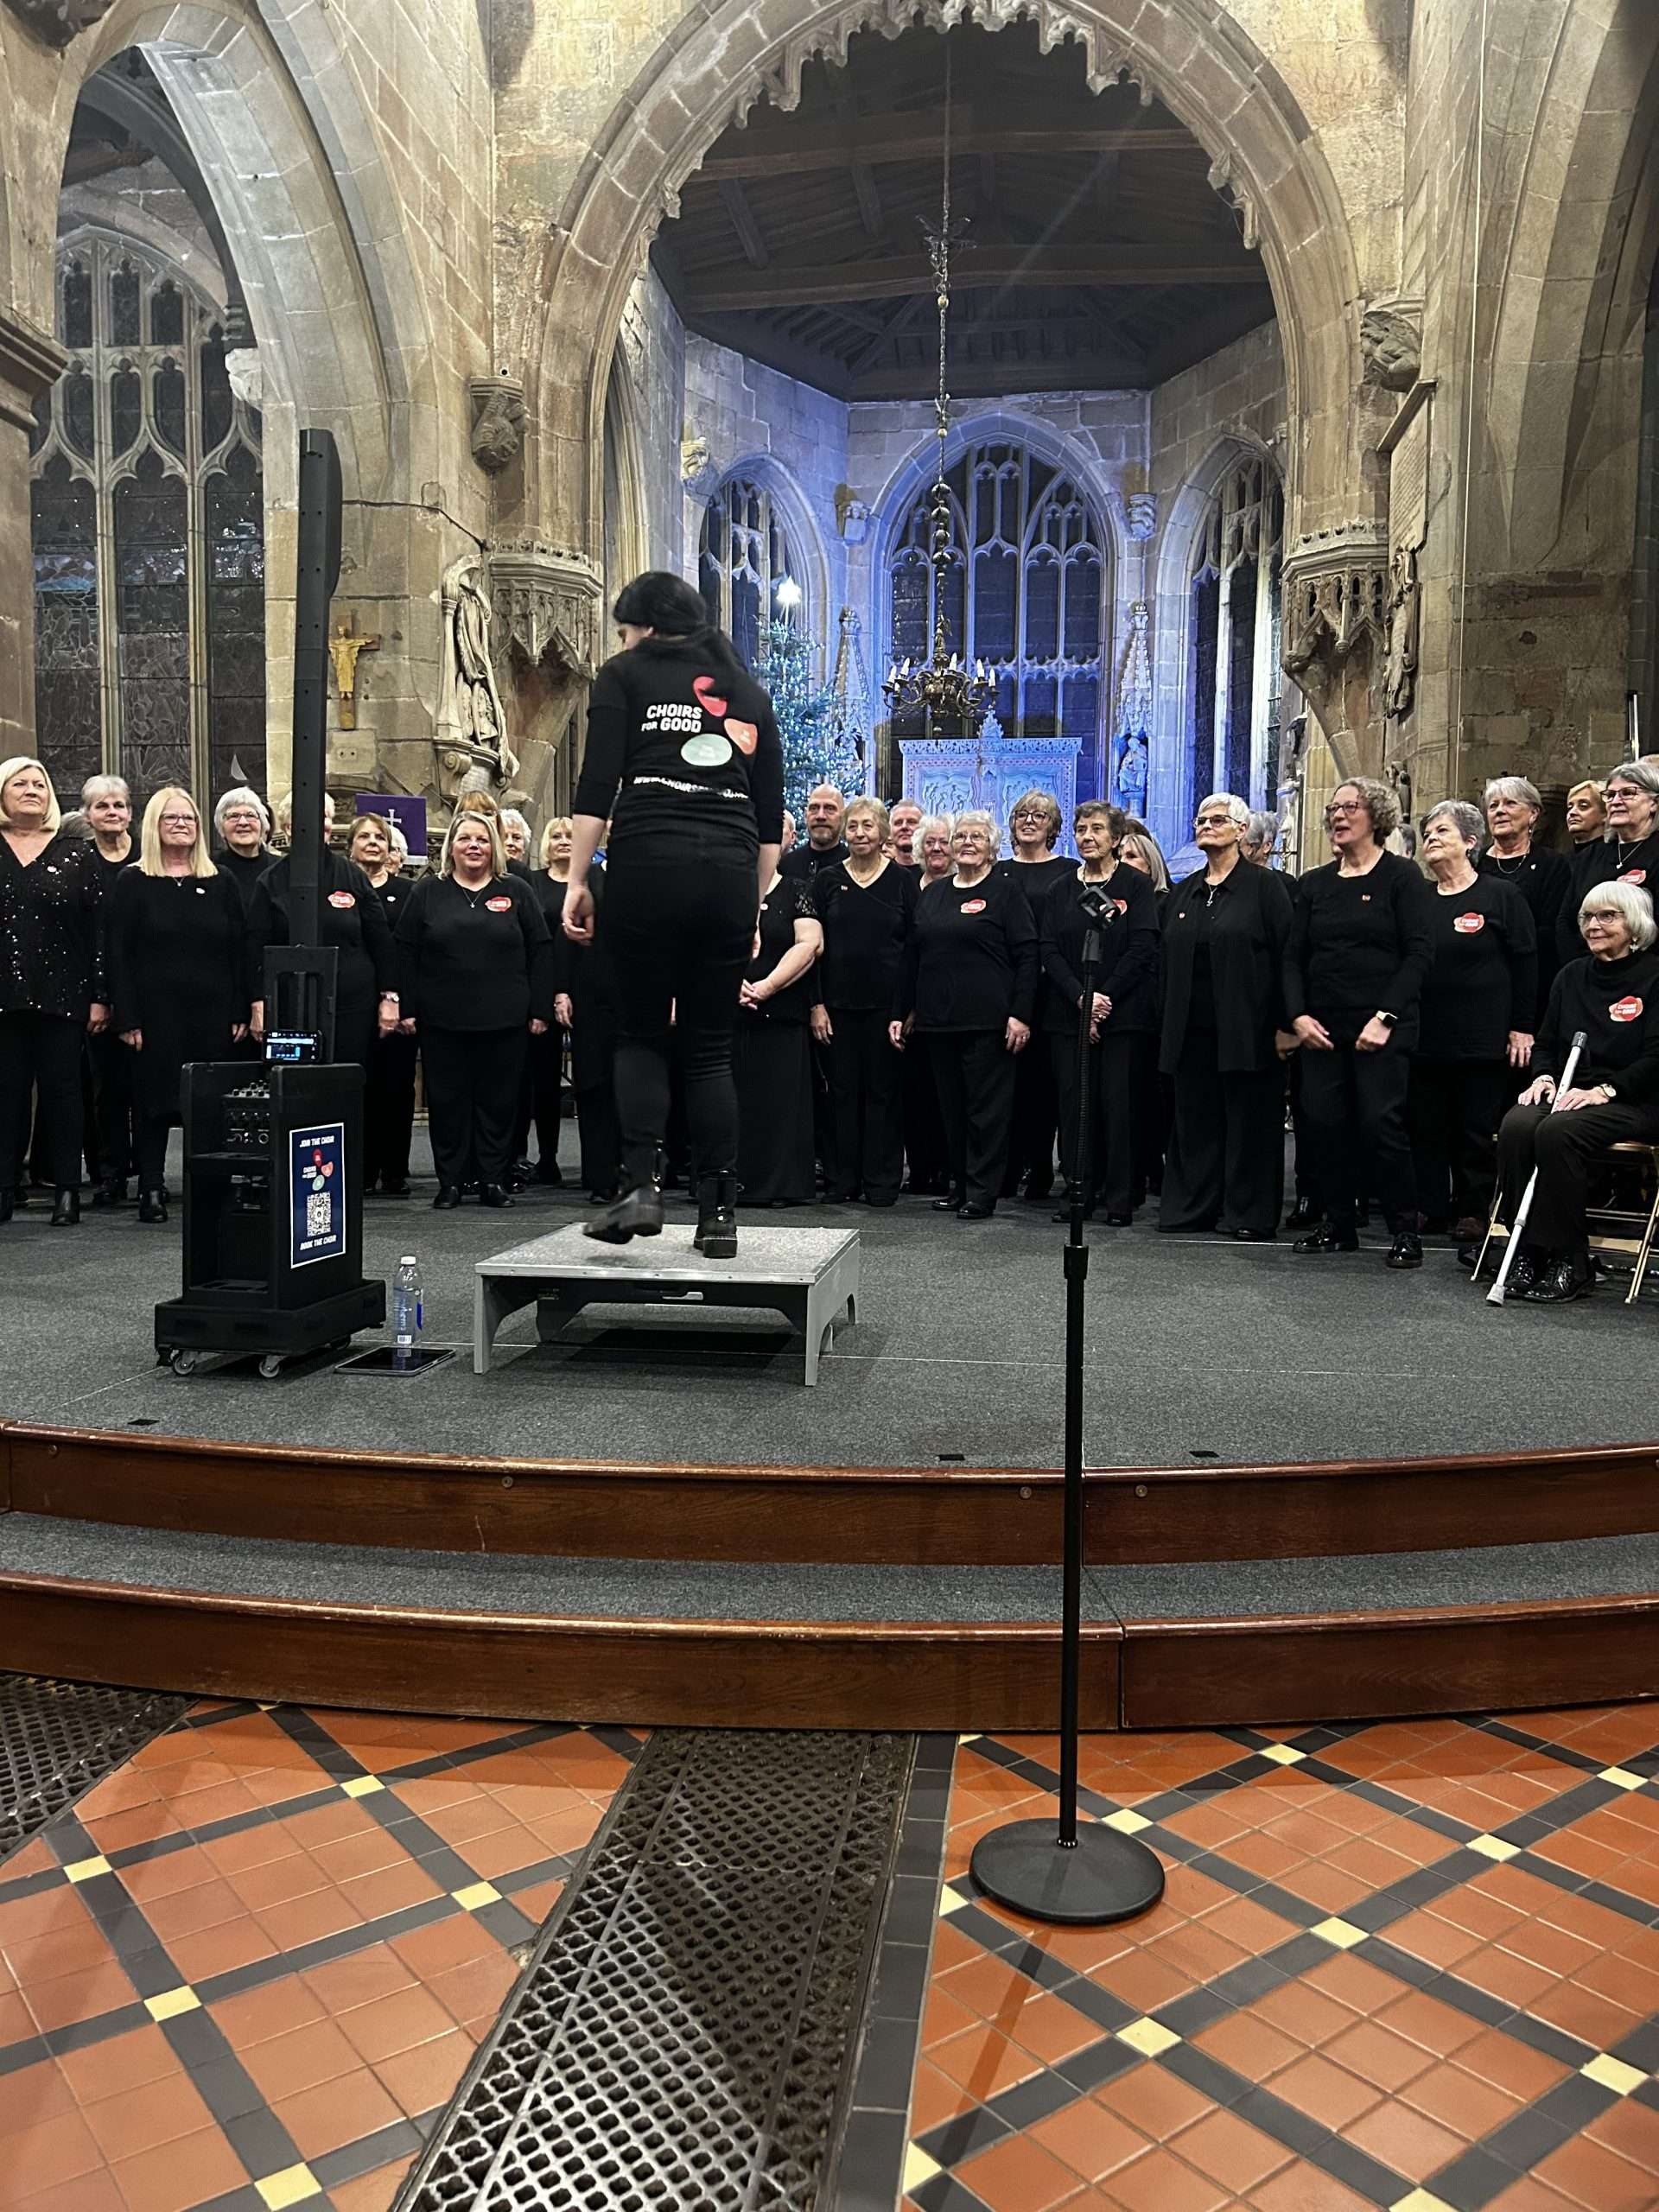 Choirs for Good raise over £14,000 for all-Wales charity